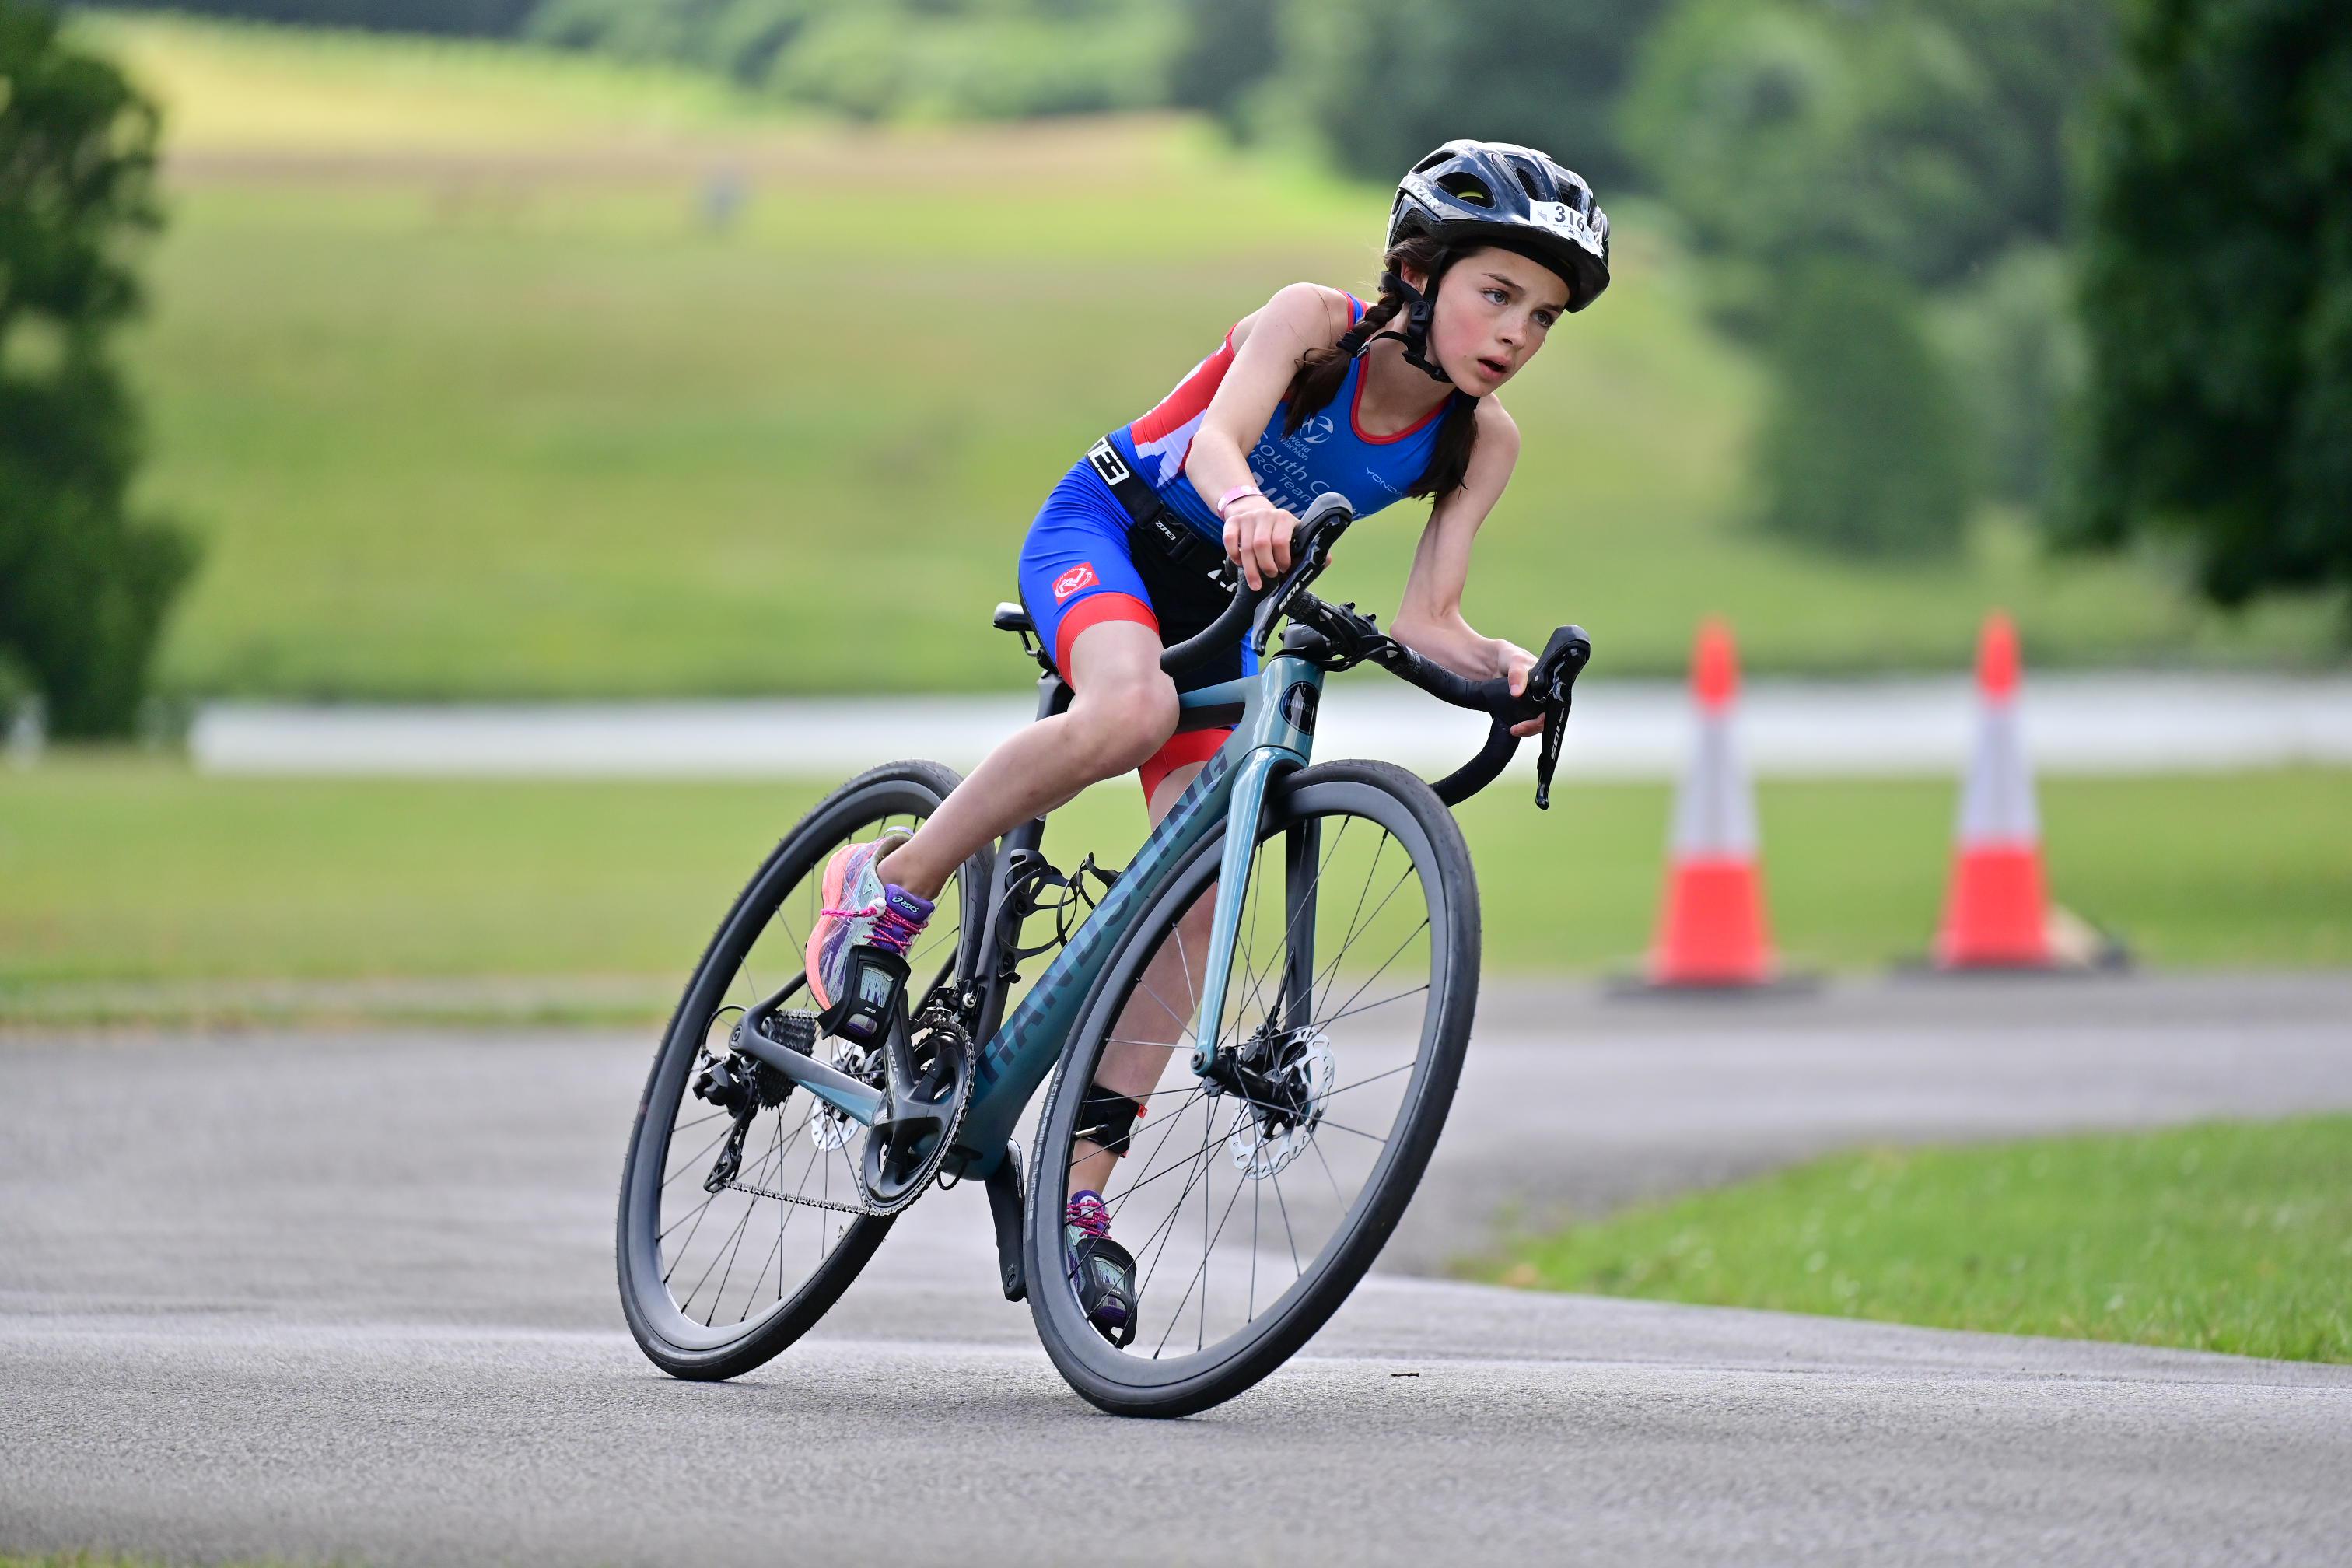 Custom built bikes for Handsling's young racers